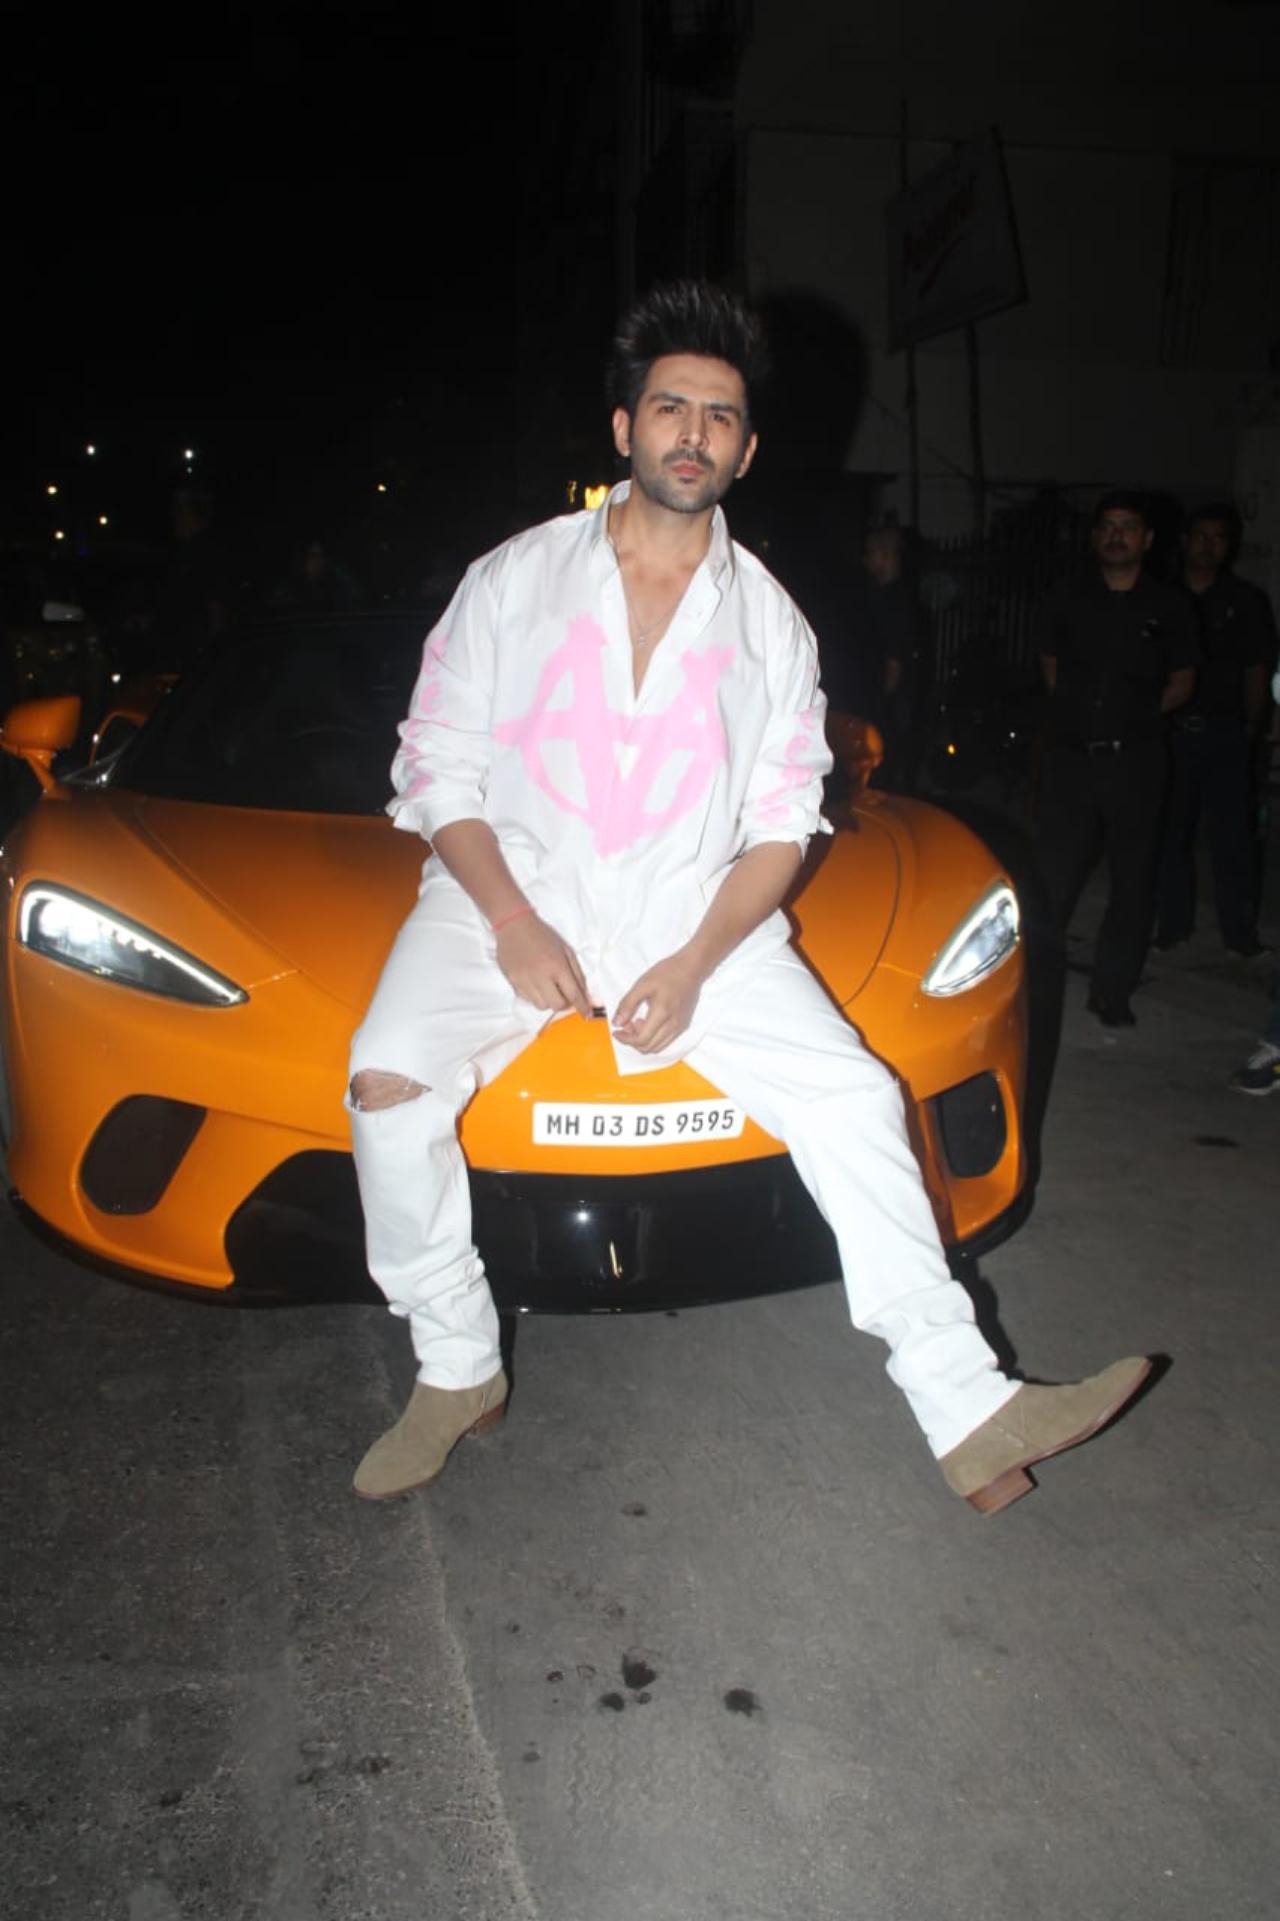 Kartik Aaryan went for a black-and-white theme for his birthday. The superstar arrived in his luxury car for the party dressed in an all-white outfit. On his birthday, the actor also treated fans with the teaser of his upcoming film Shehzada